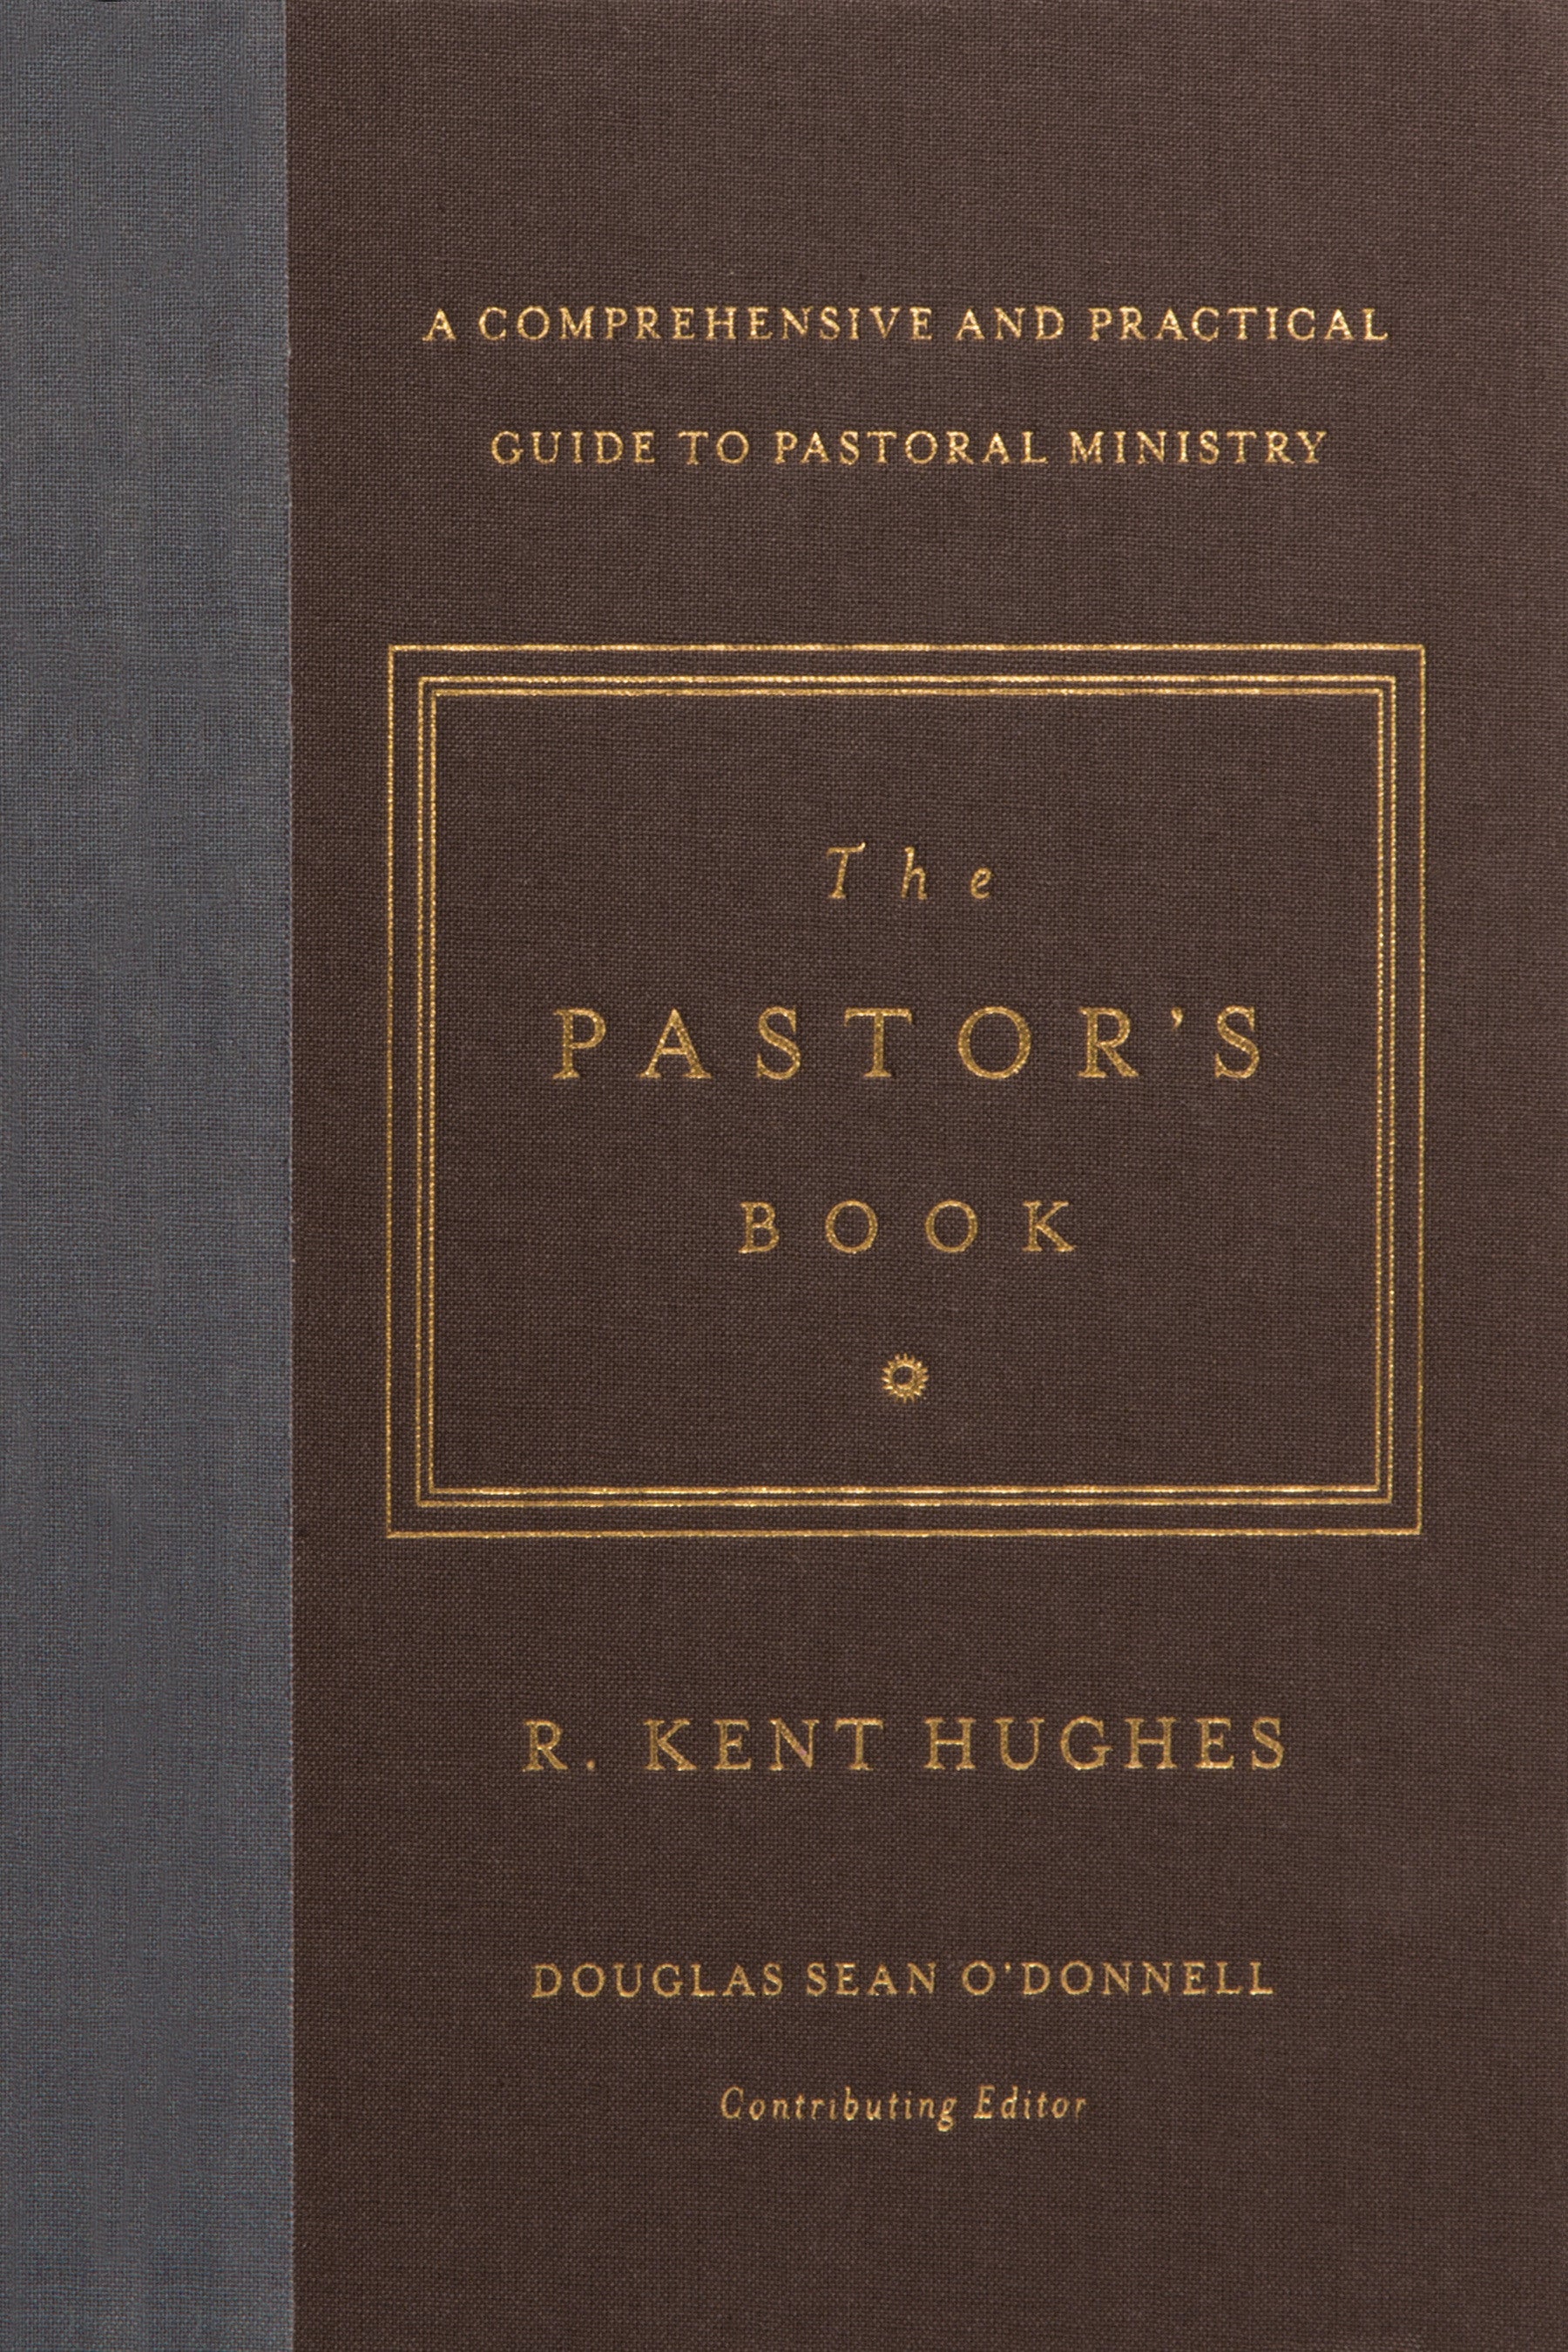 Image of The Pastor's Book other